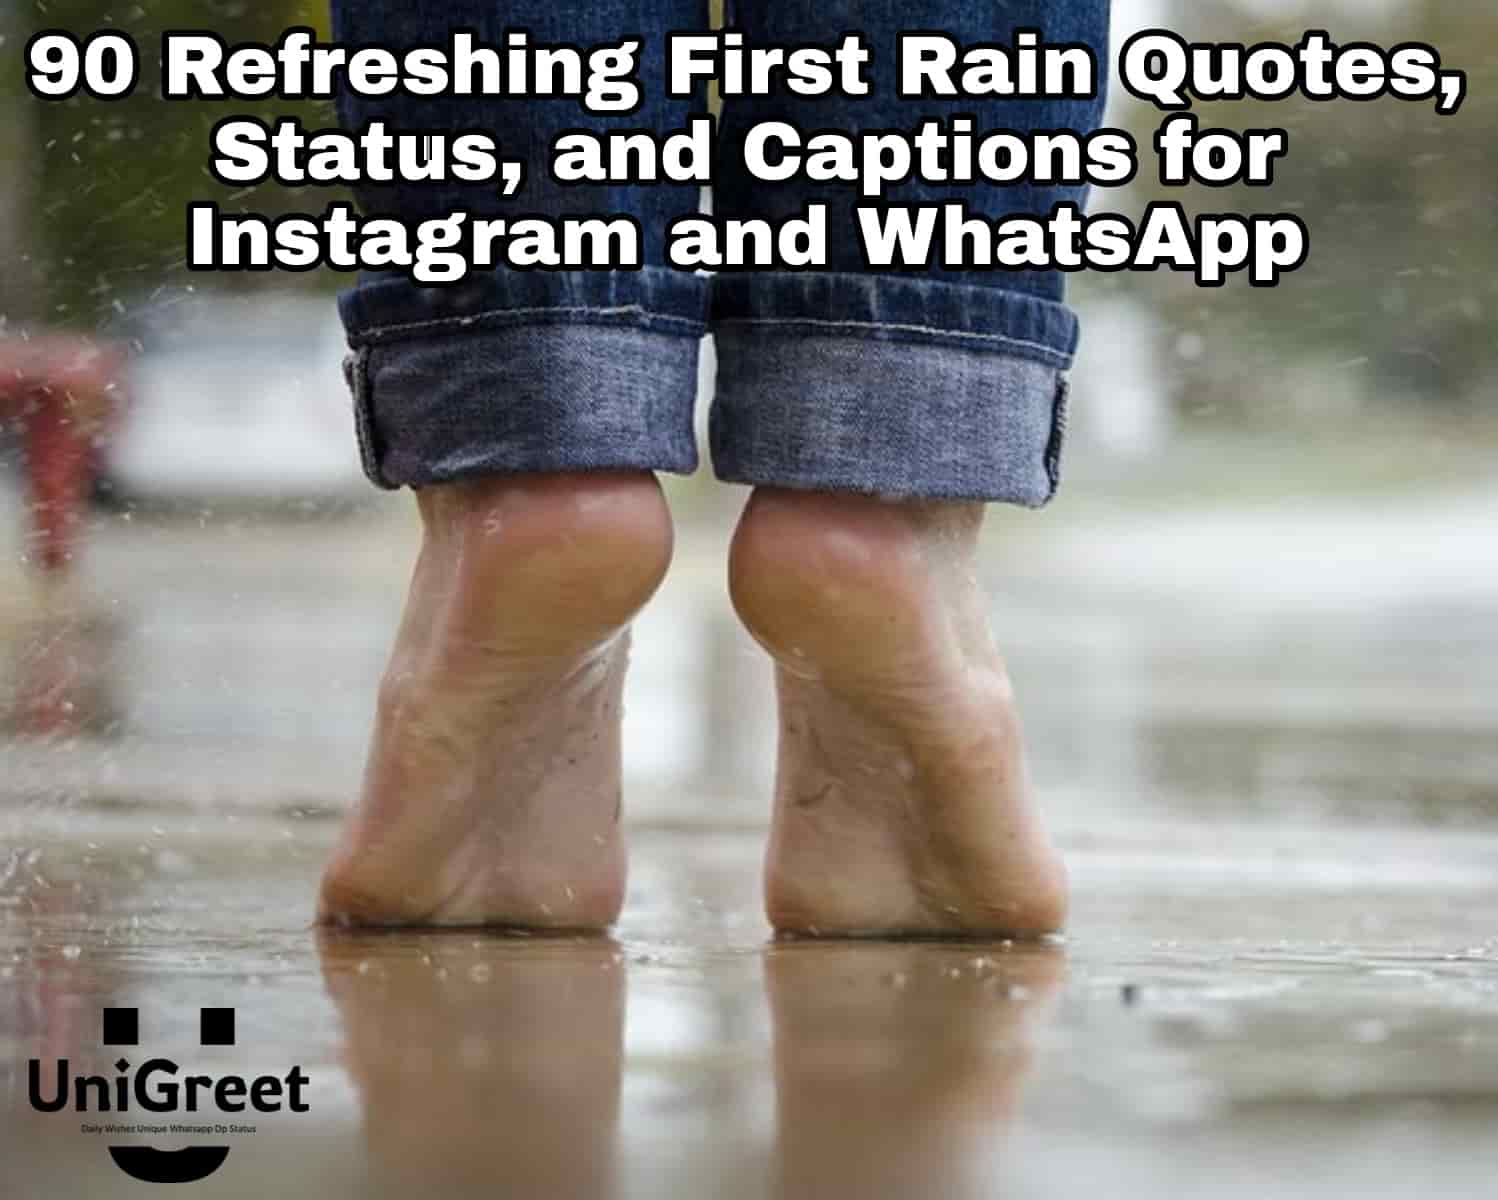 90 Refreshing First Rain Quotes, Status, and Captions for Instagram and WhatsApp